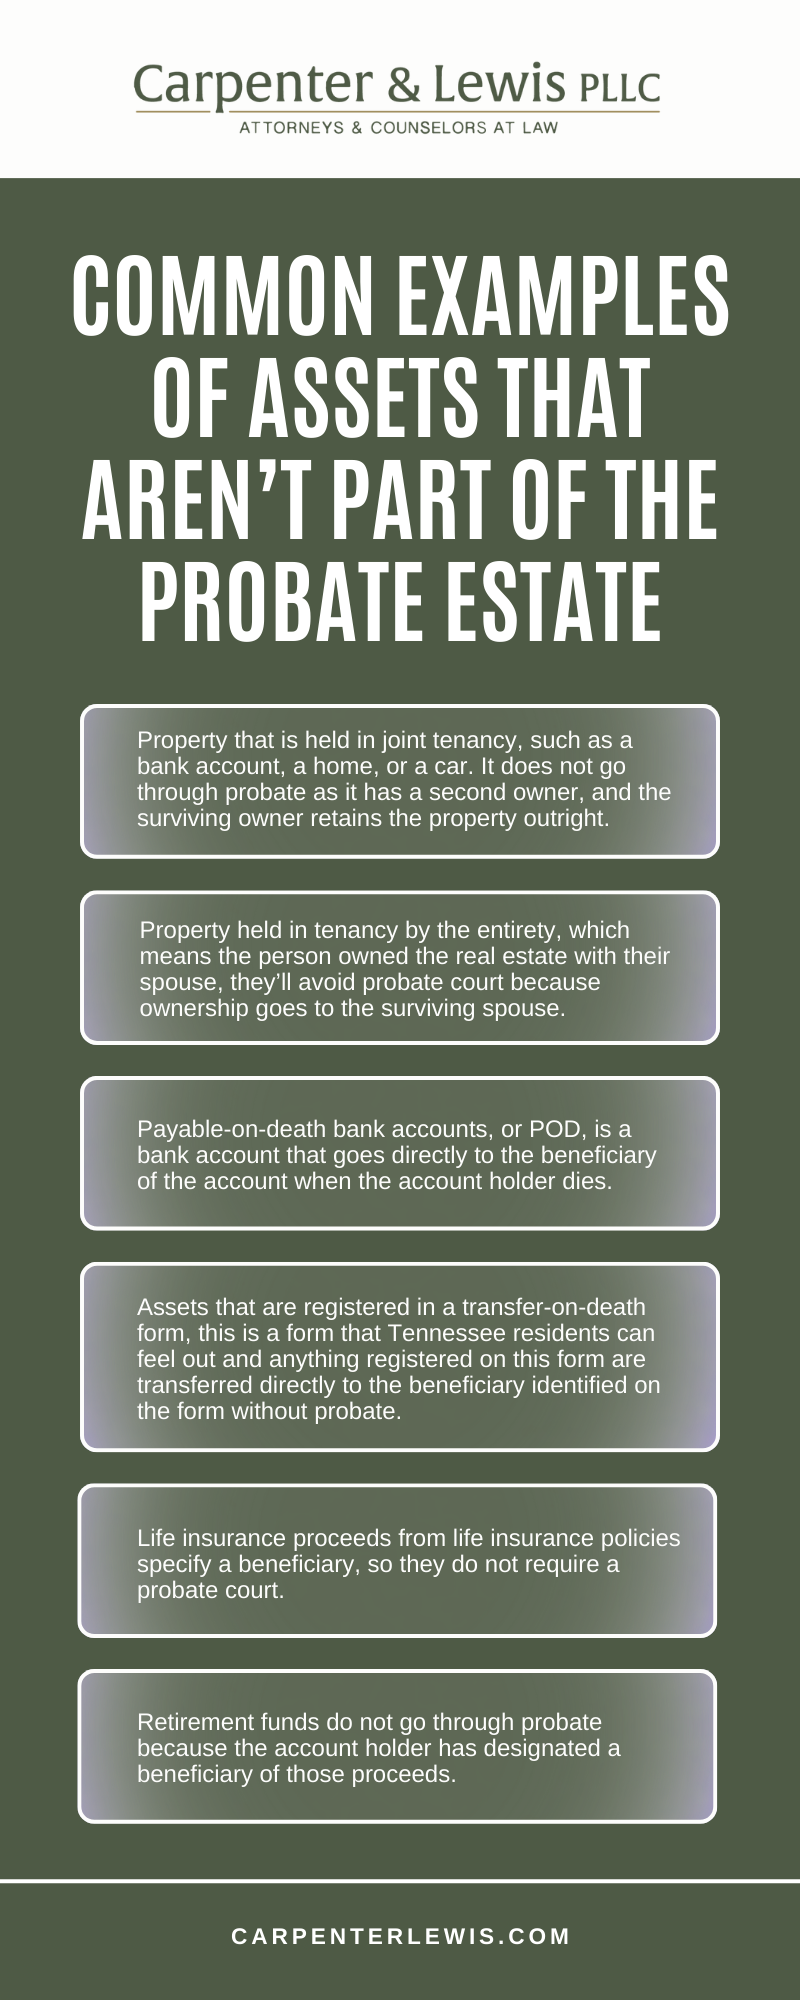 Common Examples Of Assets That Aren't Part Of The Probate Estate Infographic